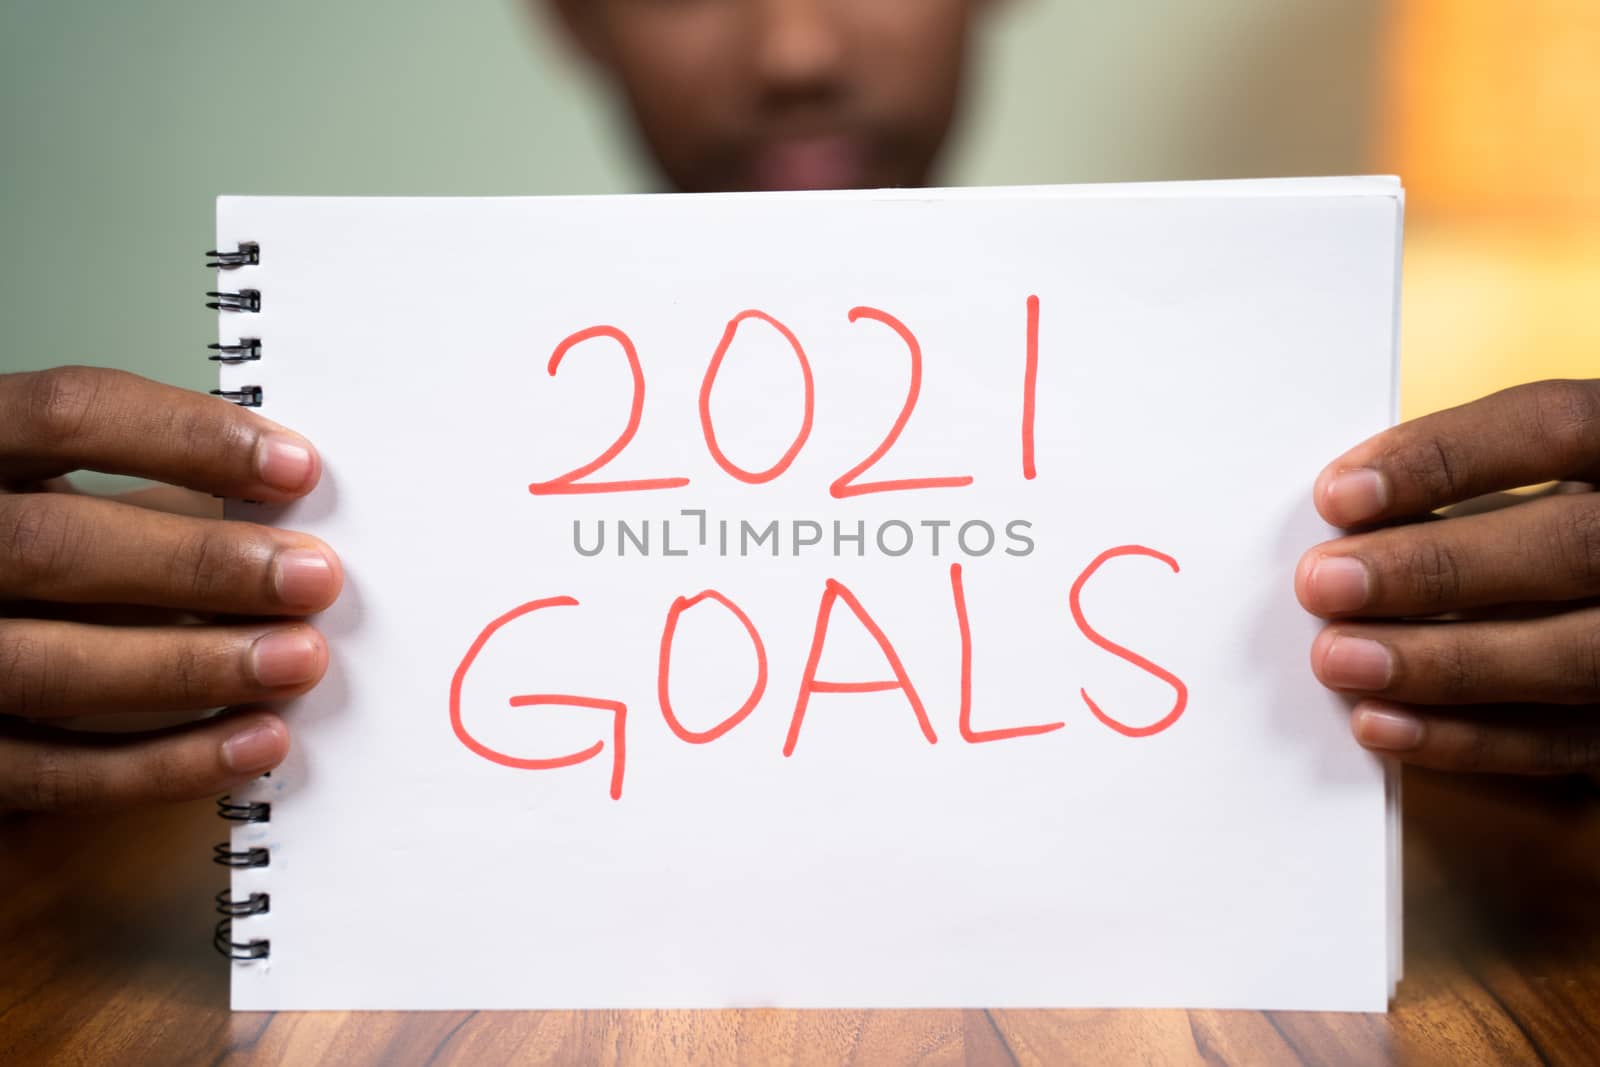 Man on table holding 2021 goals book in front of camera - concept of planning 2021 new year goals. by lakshmiprasad.maski@gmai.com